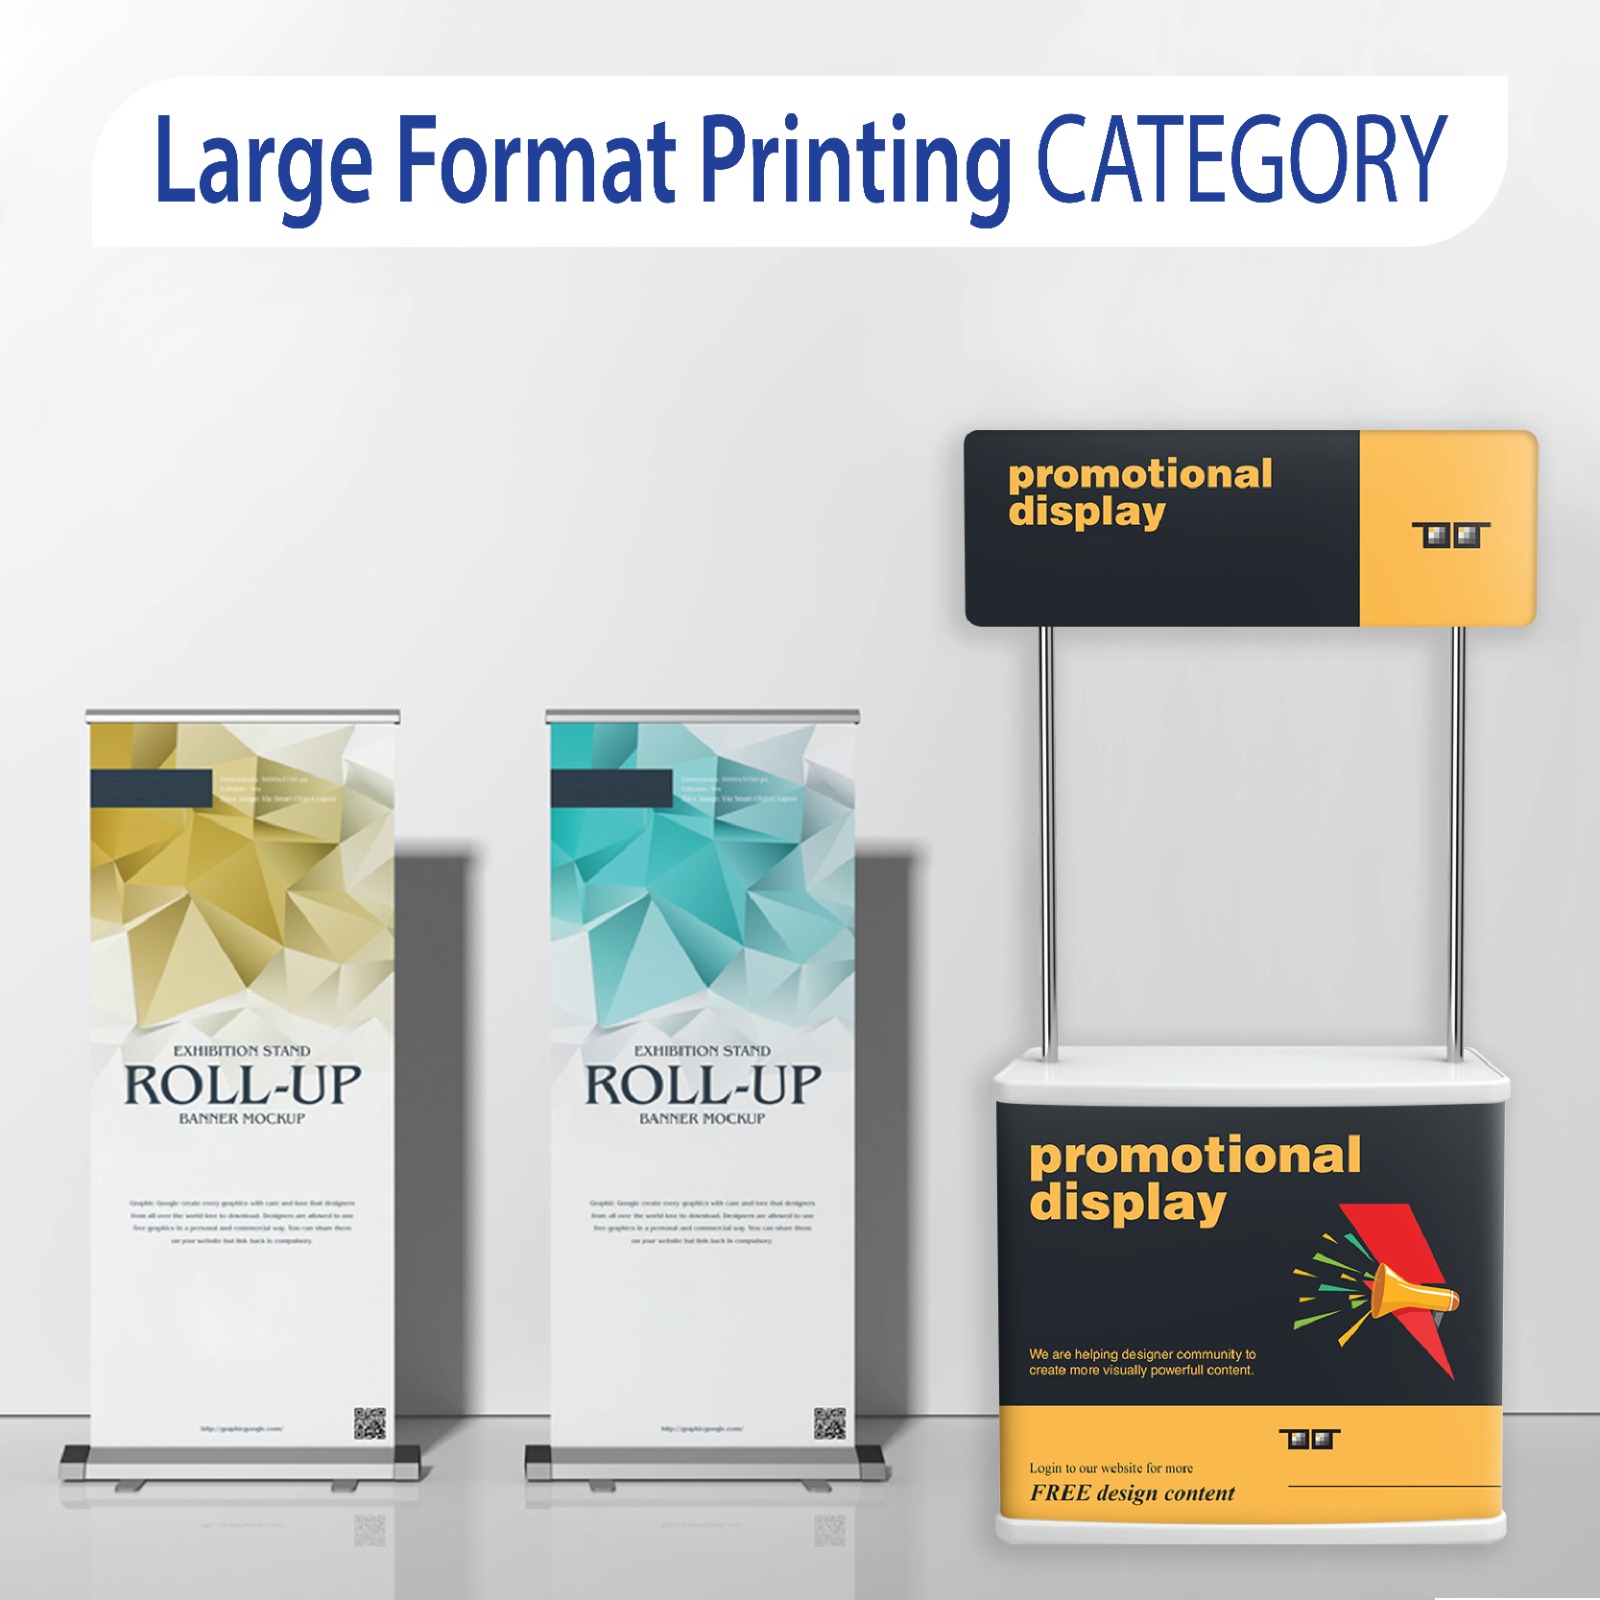 Large Format Printing Category